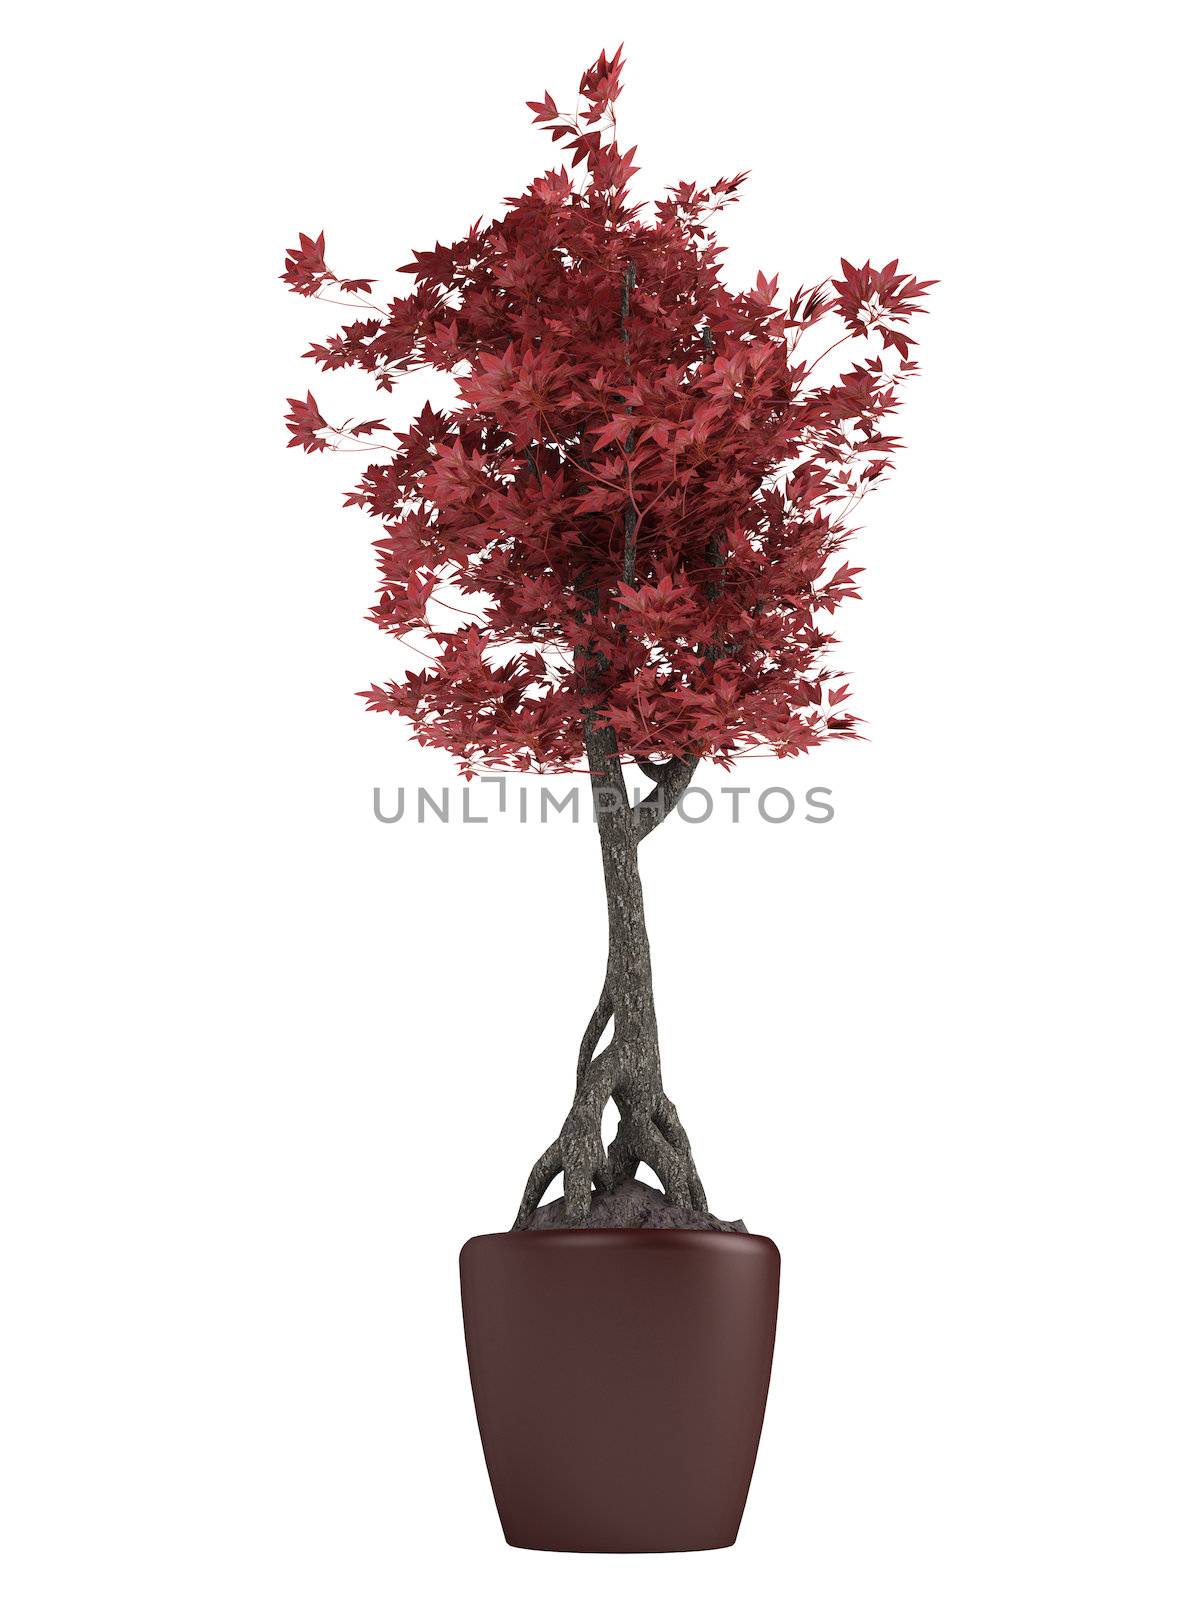 Red bonsai tree in a pot isolated on white background